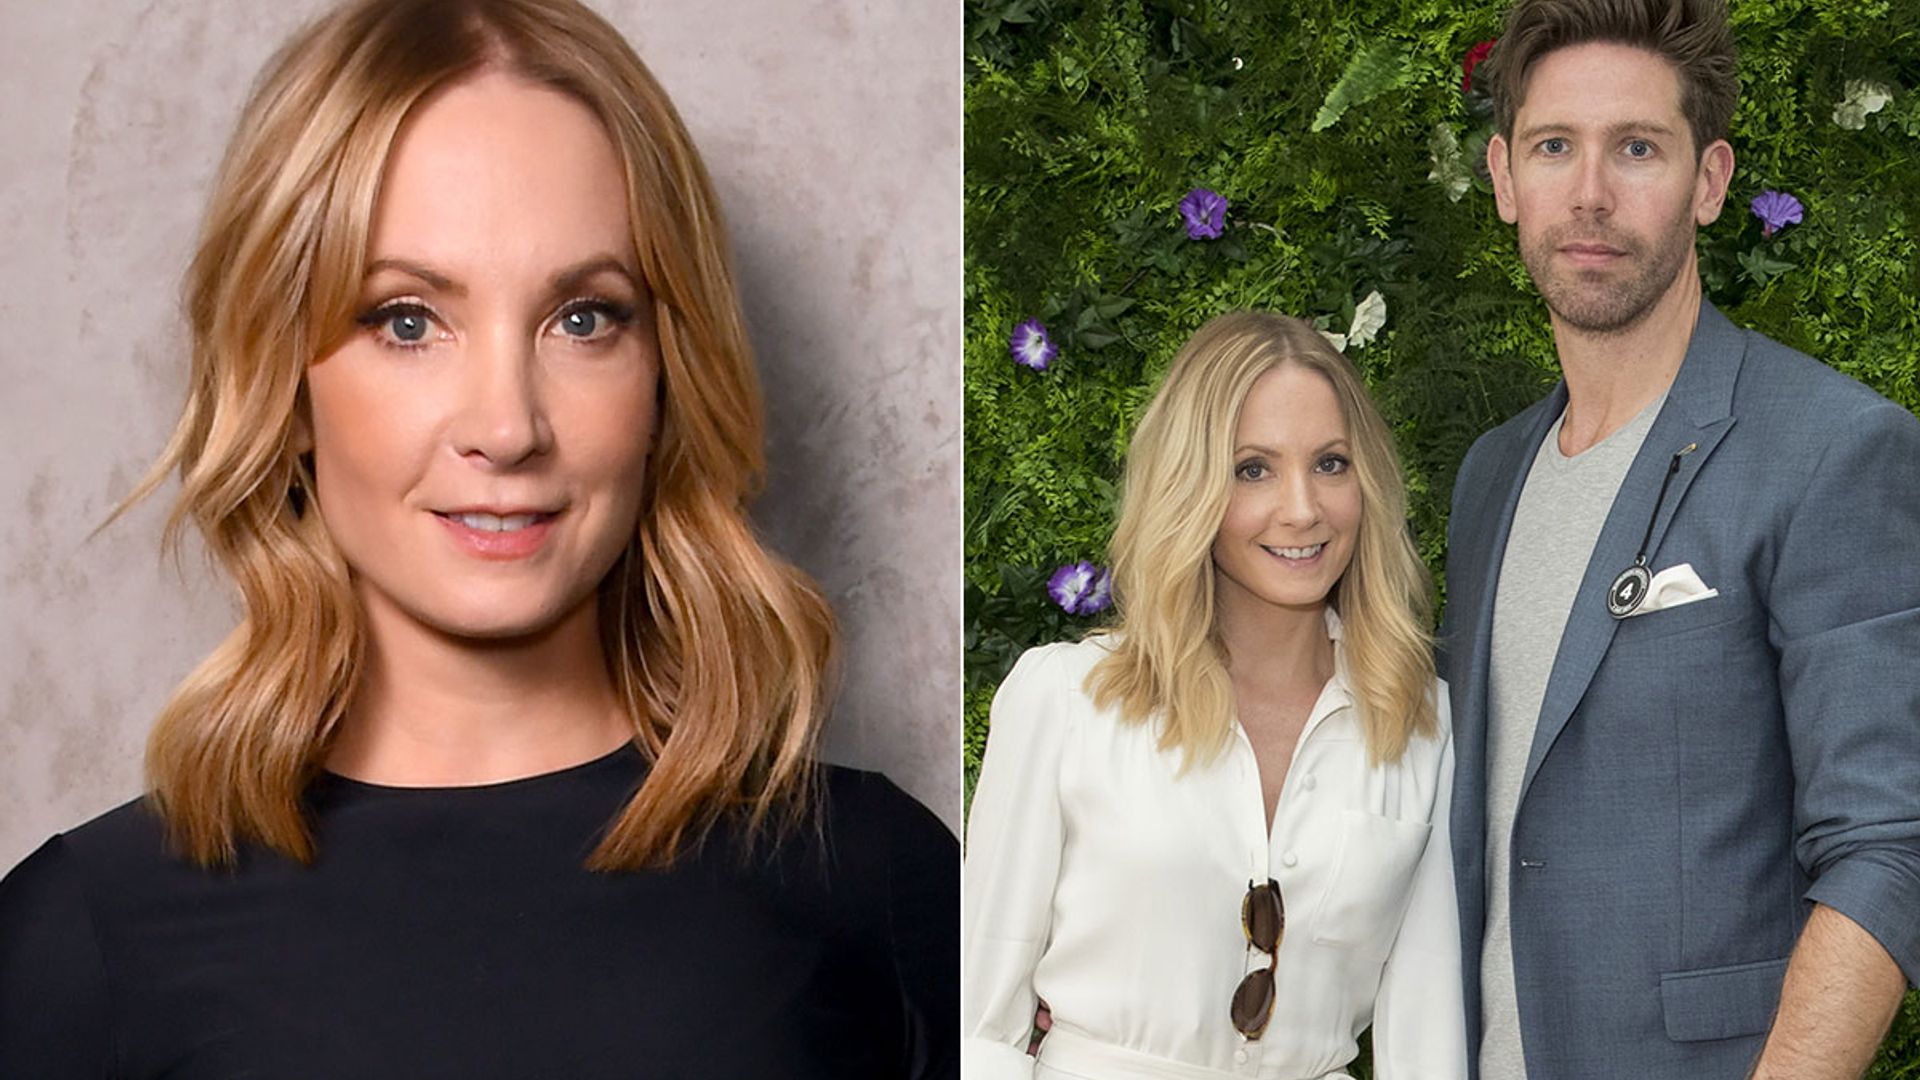 Downton Abbey's Joanne Froggatt makes extremely candid comment about her divorce